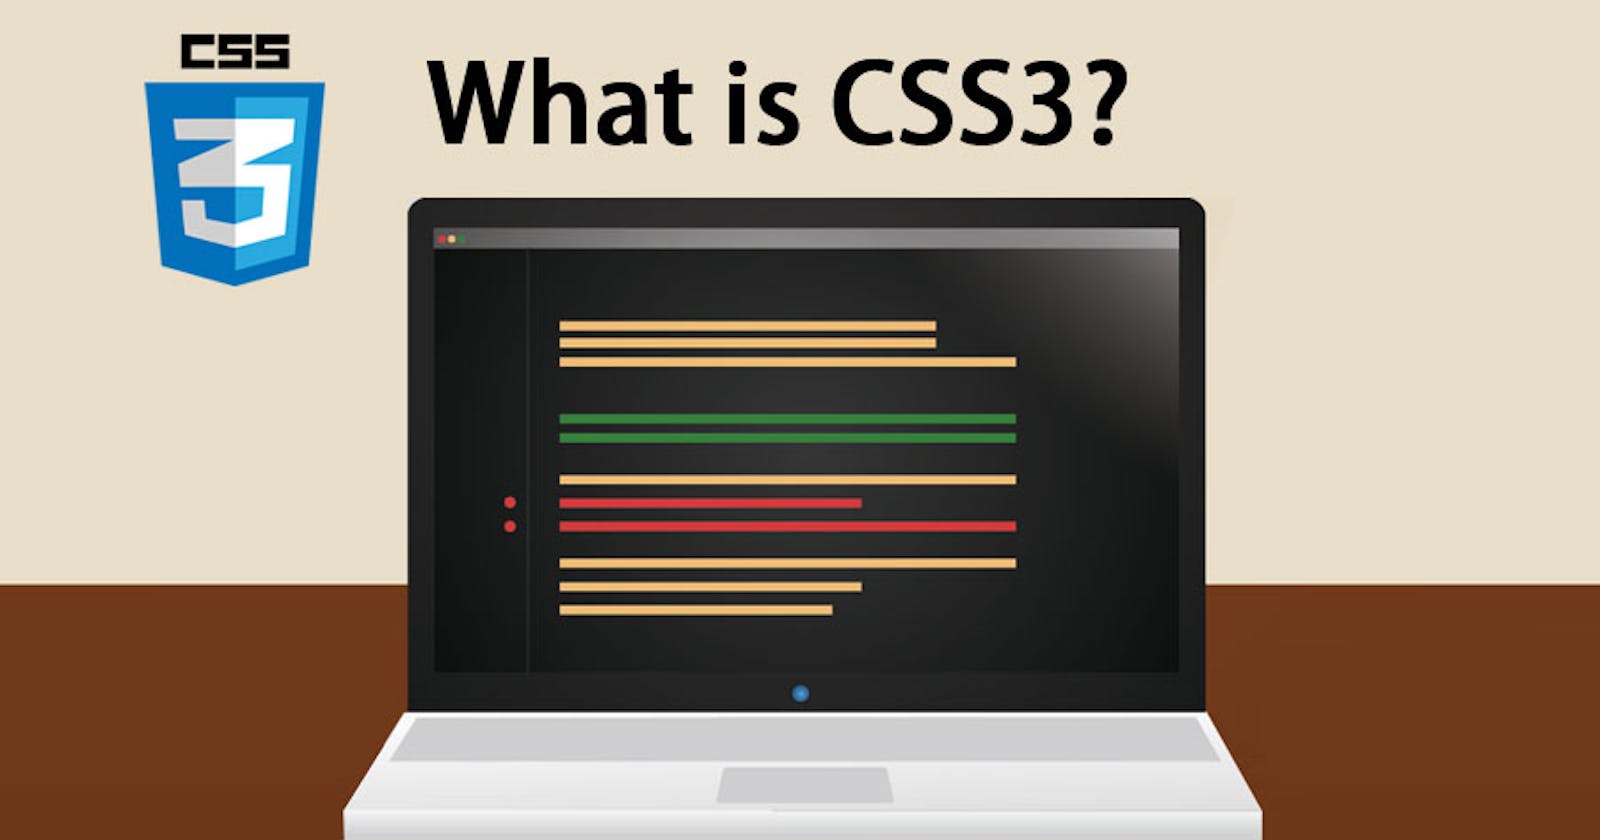 About CSS3